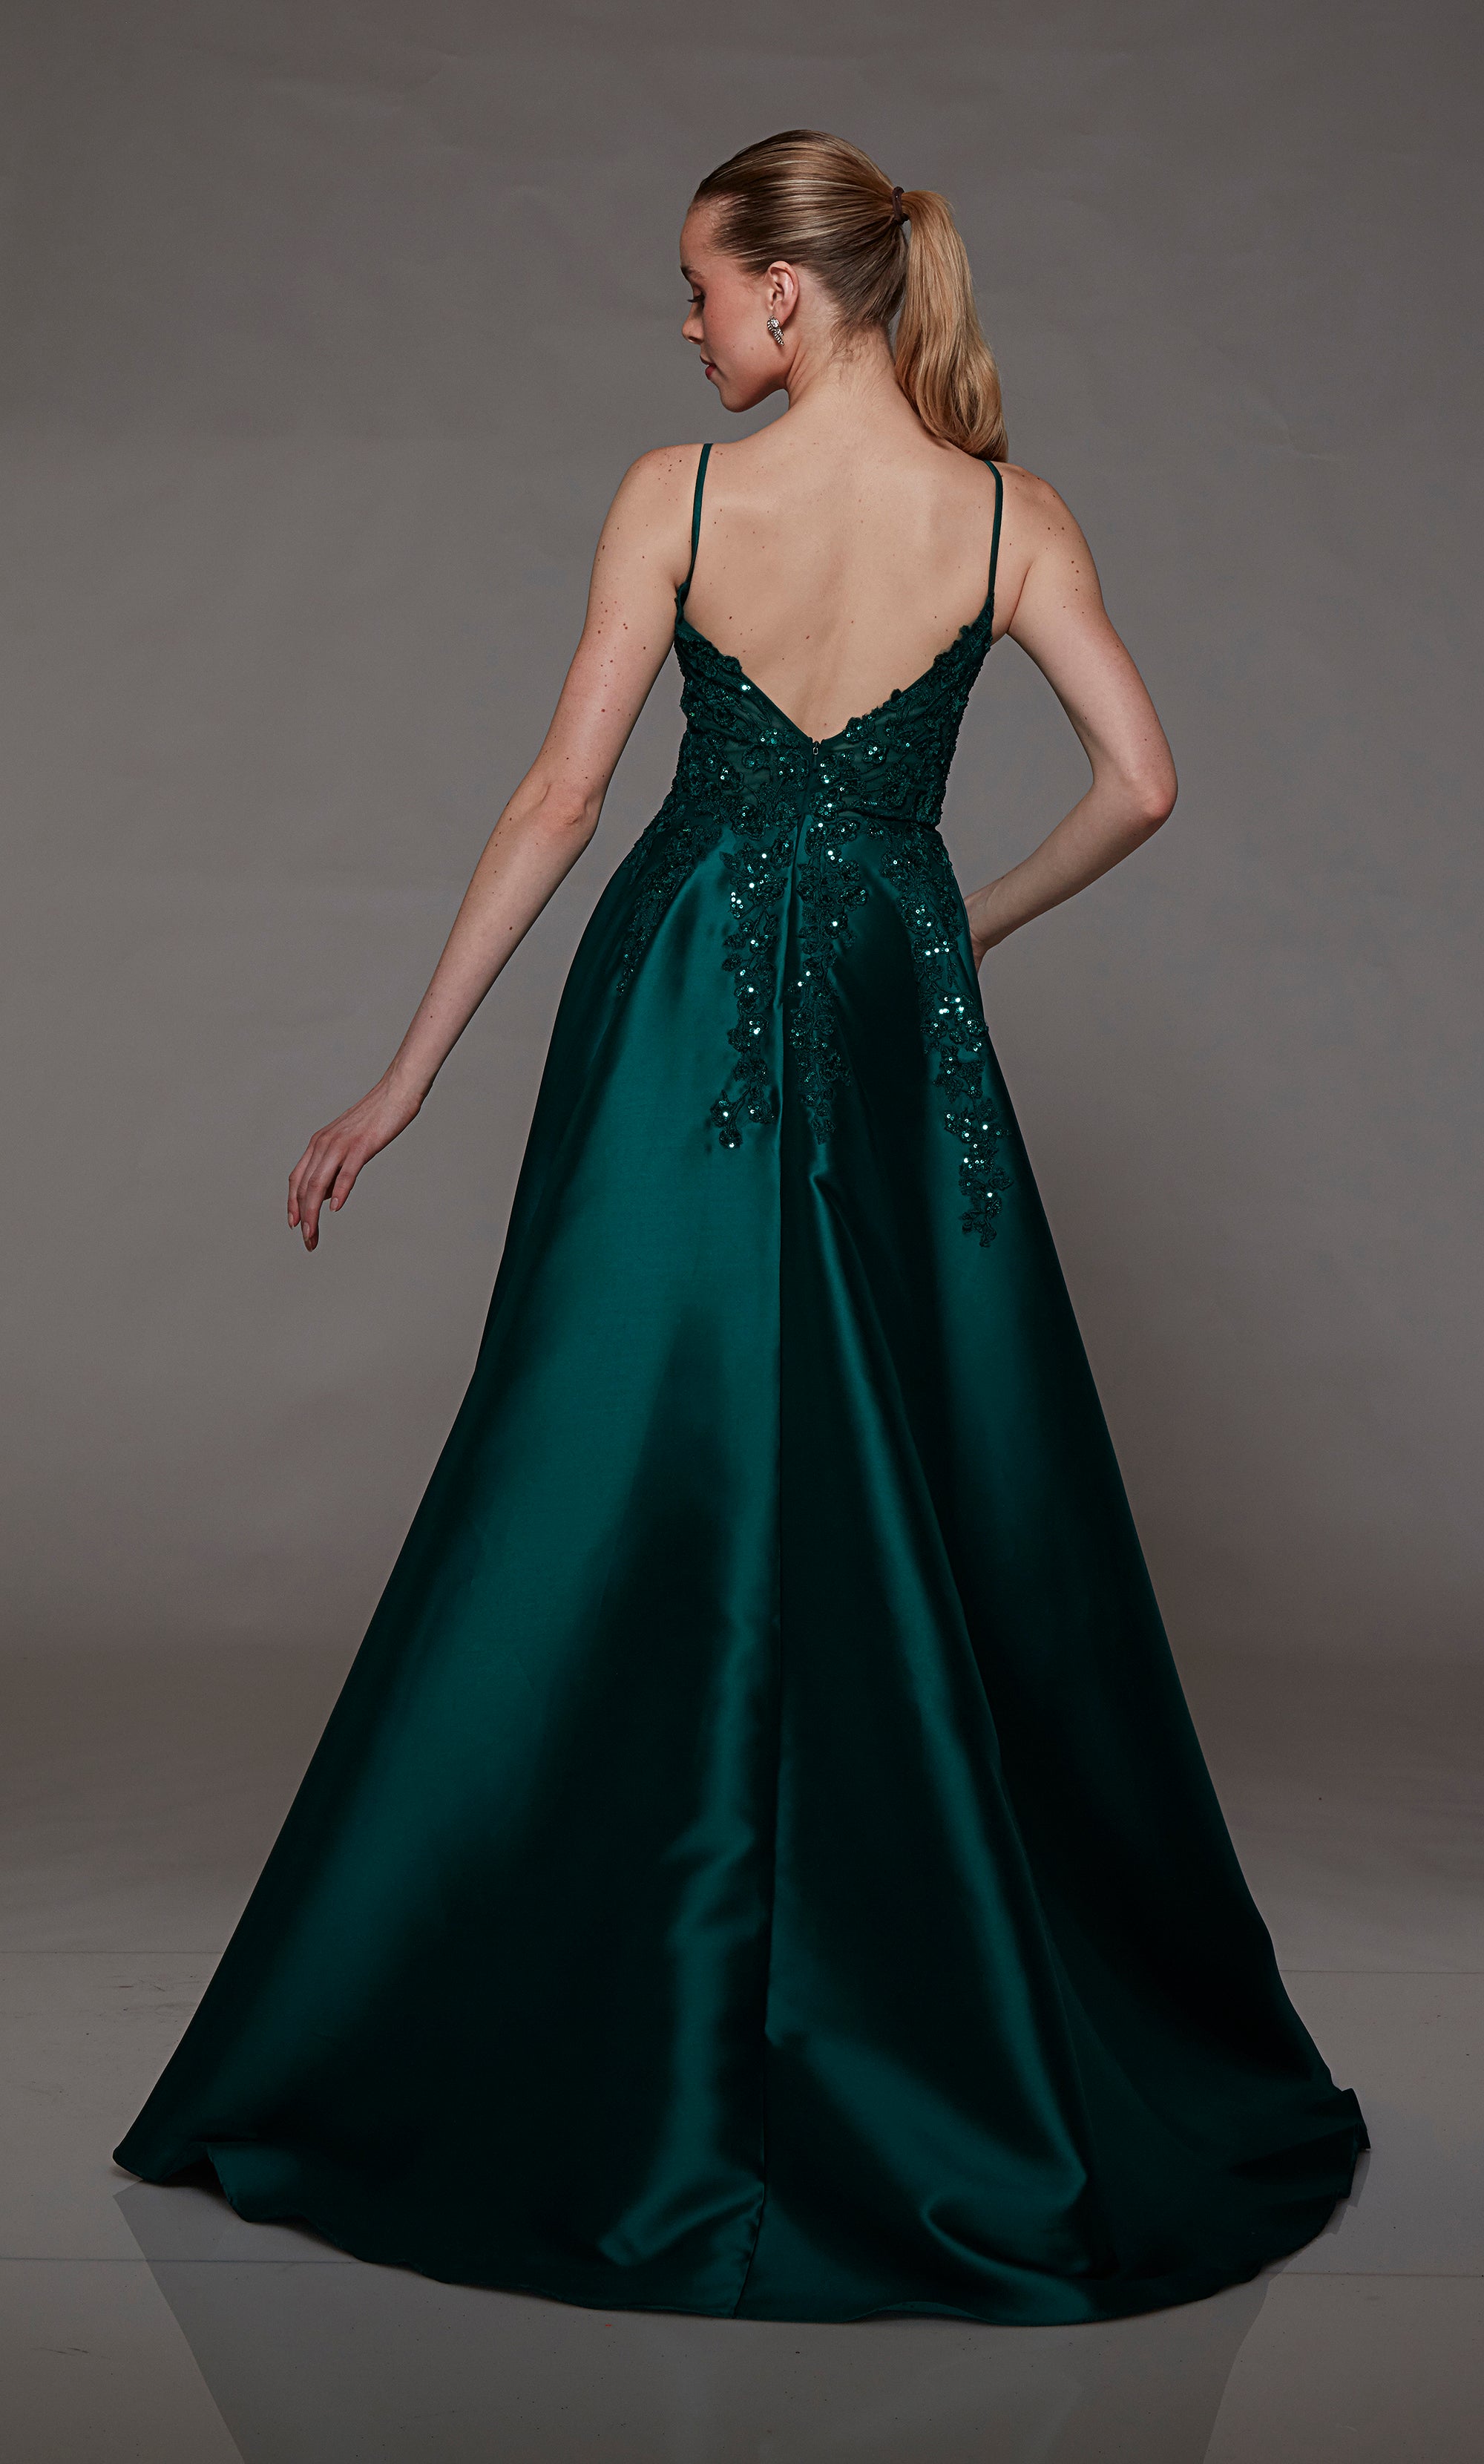 Plunging pine green A-line designer gown featuring an front slit, convenient pockets, sequined floral lace appliques, an stylish V-shaped back, and an subtle train for an chic and modern elegance.